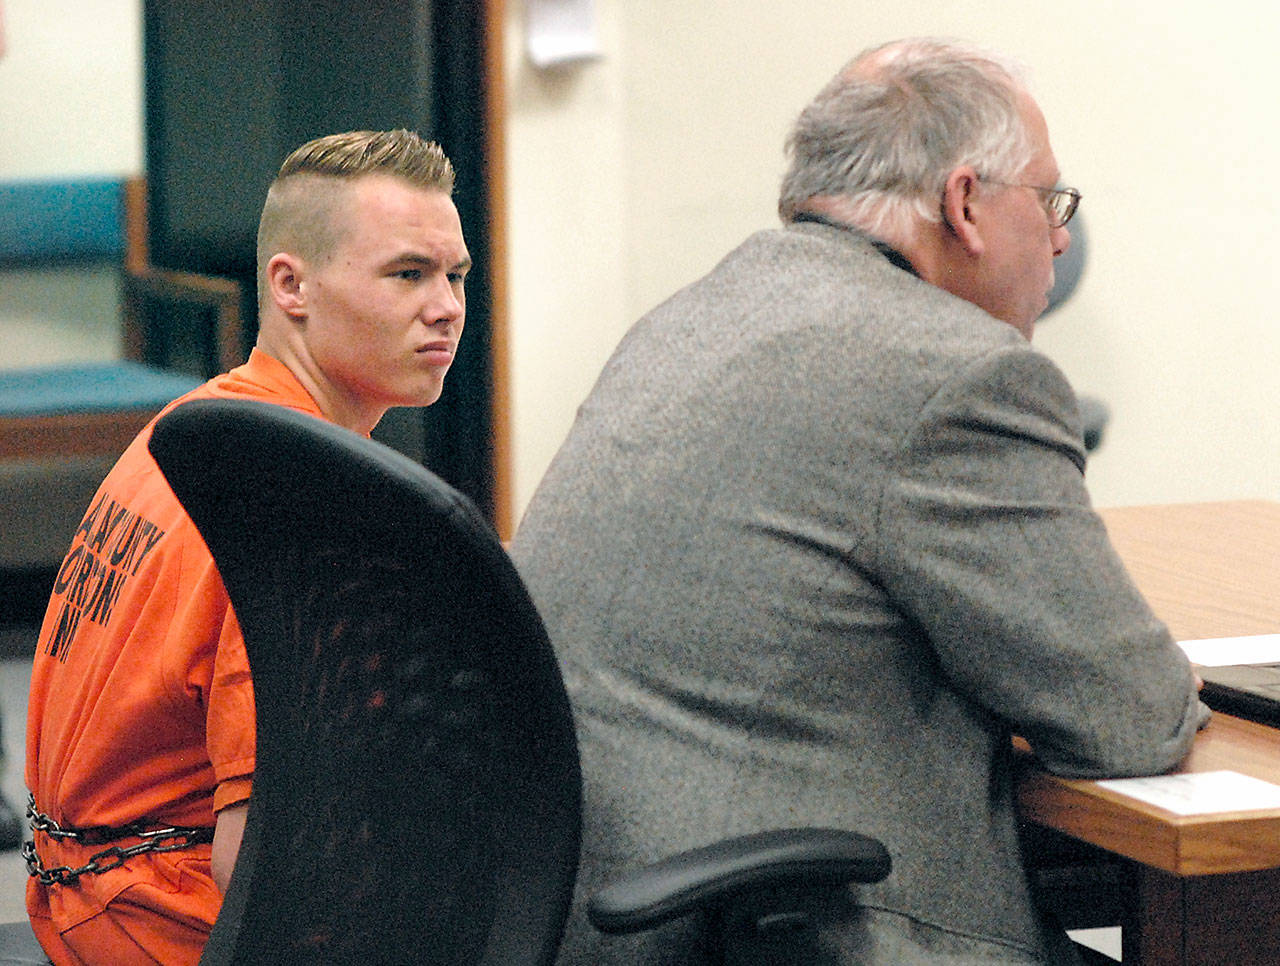 Benjamin Bonner looks at defense attorney Harry Gasnick during Bonner’s first appearance in Clallam County Superior Court in May. (Keith Thorpe/Peninsula Daily News)